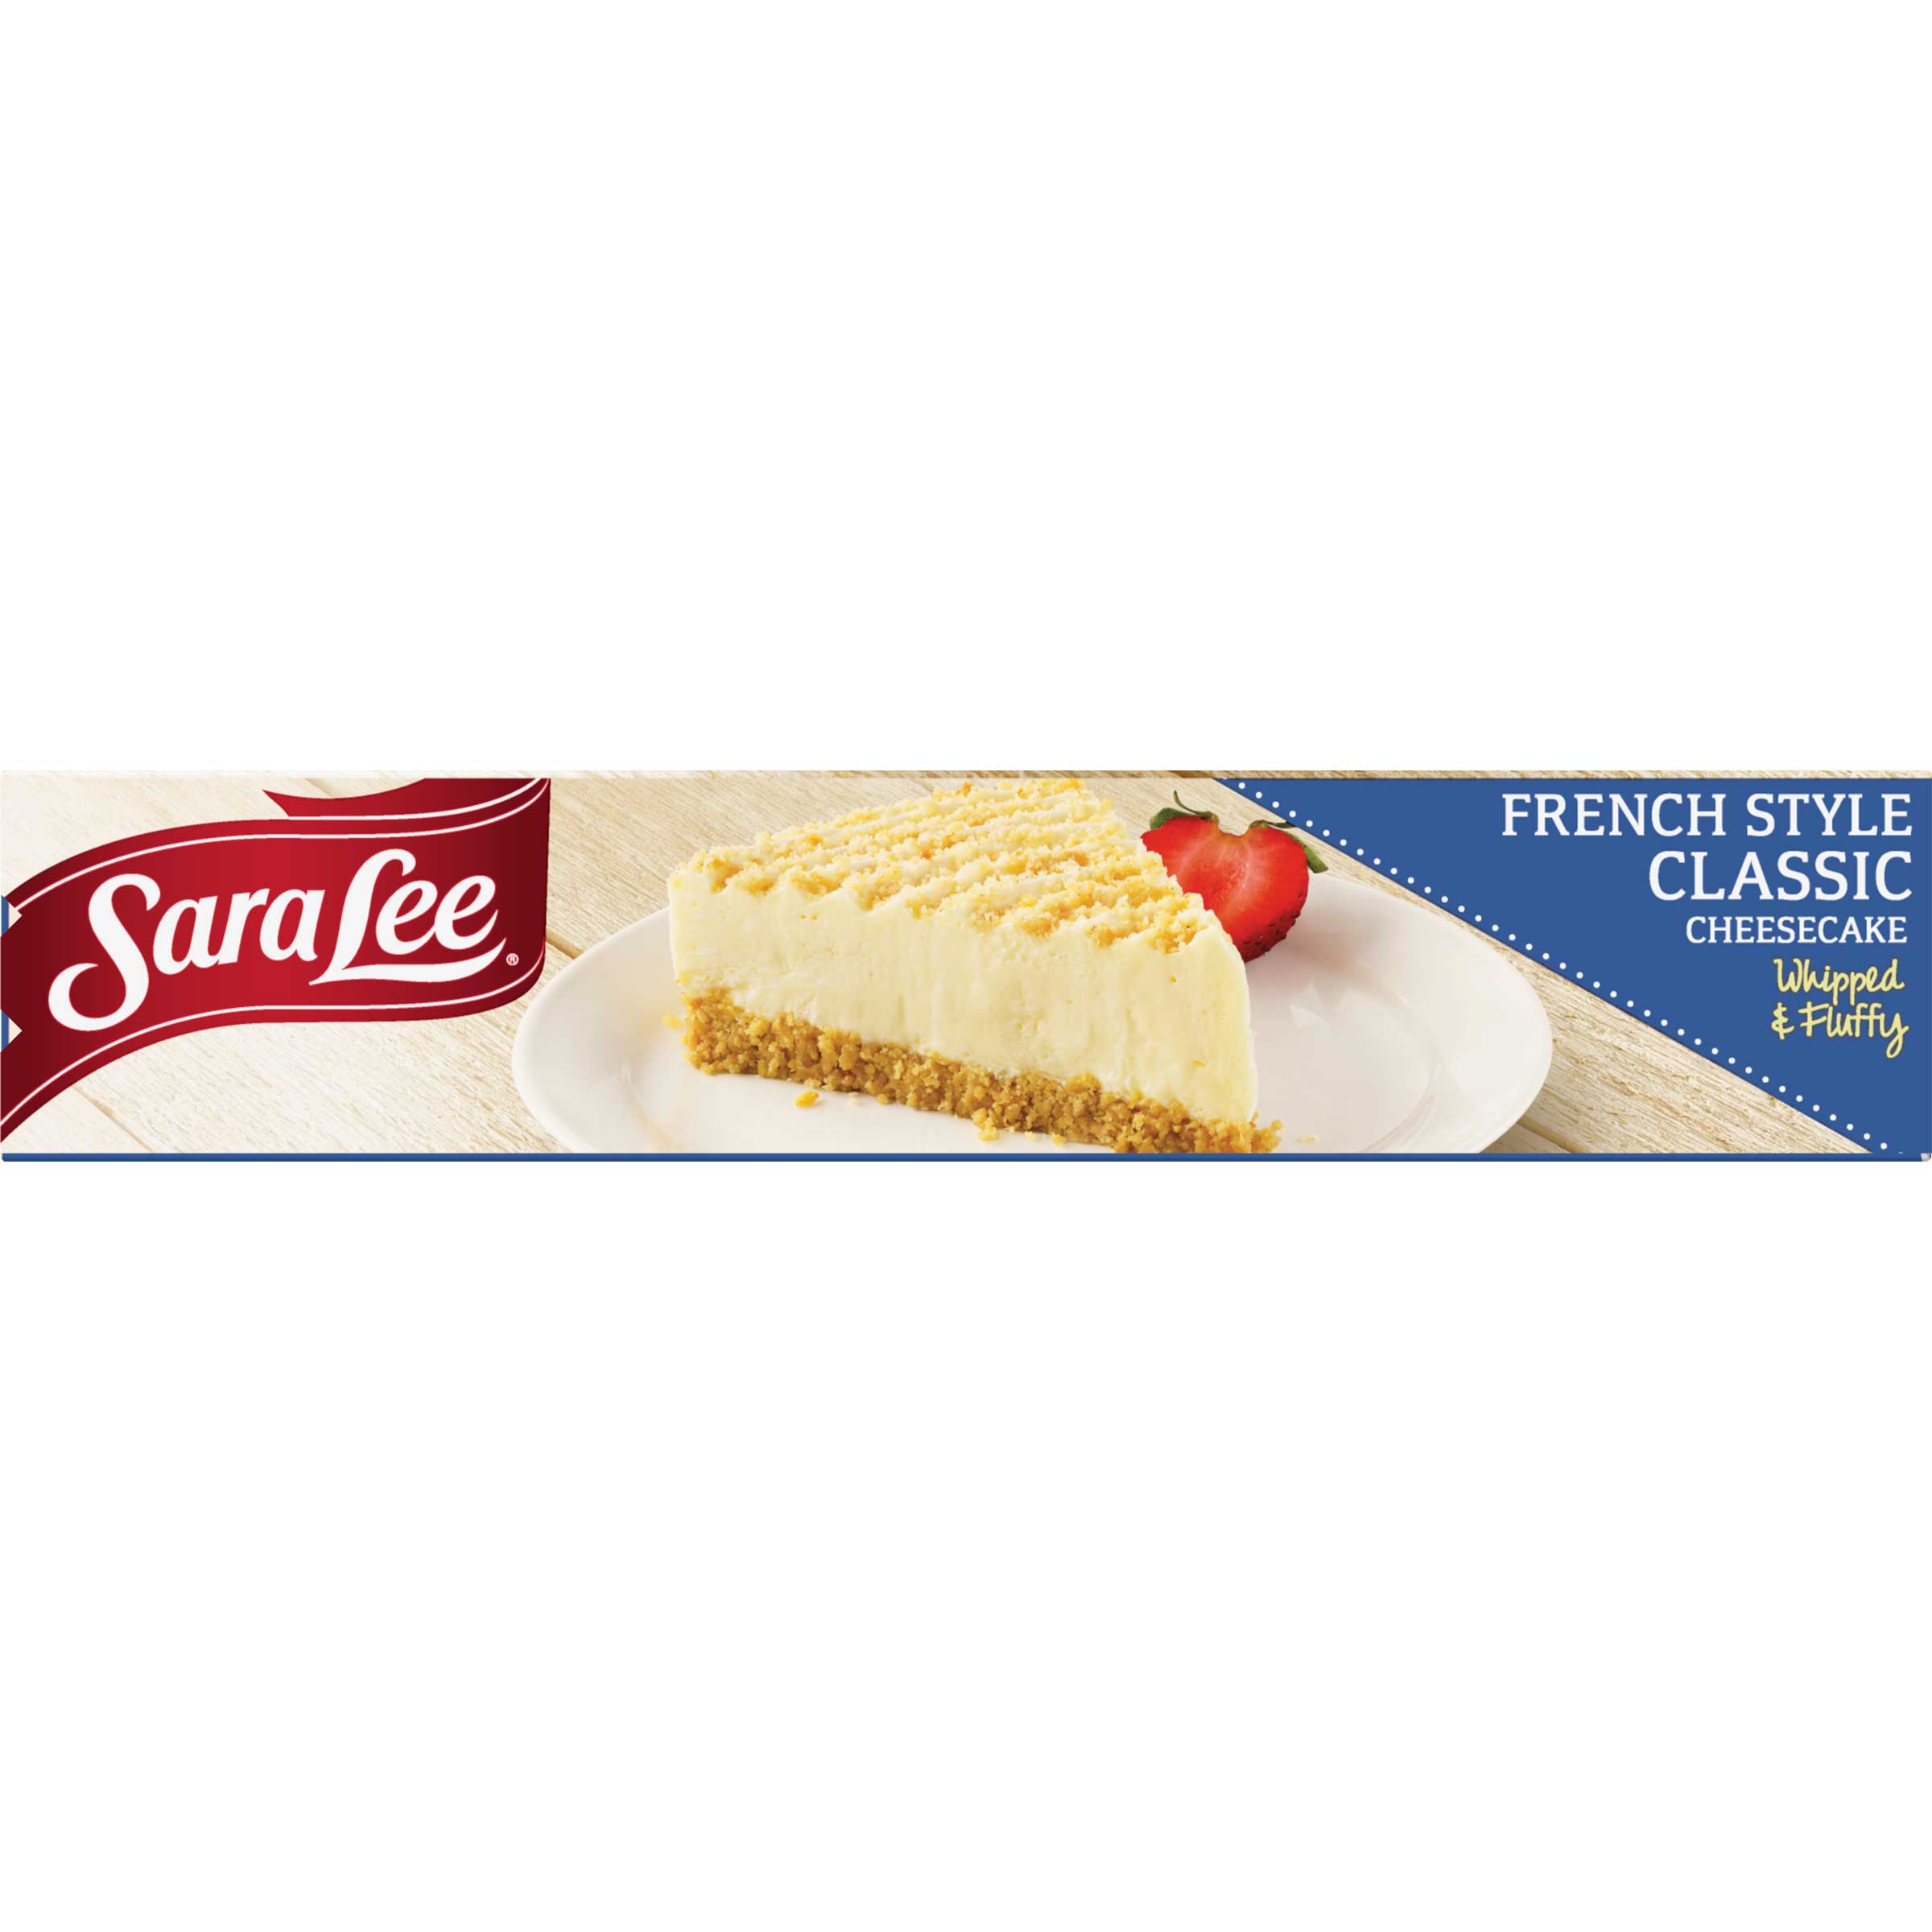 Sara Lee French Style Cheesecake Case